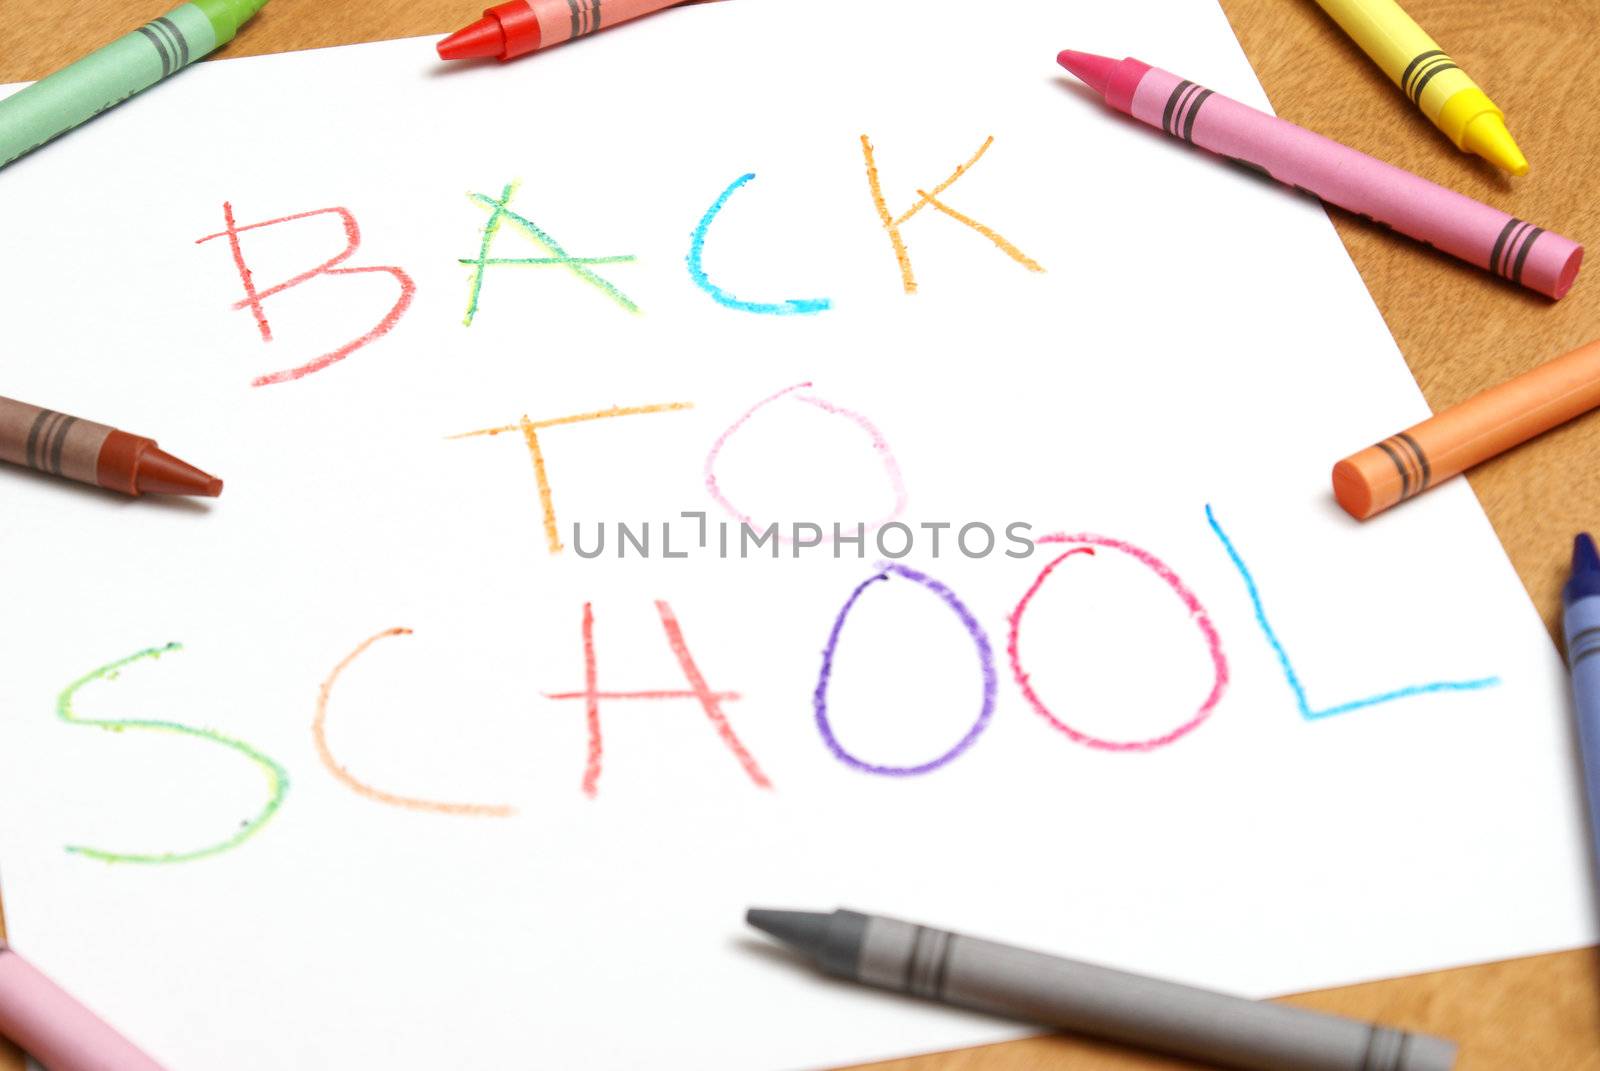 A childish back to school sign written in colorful crayons.